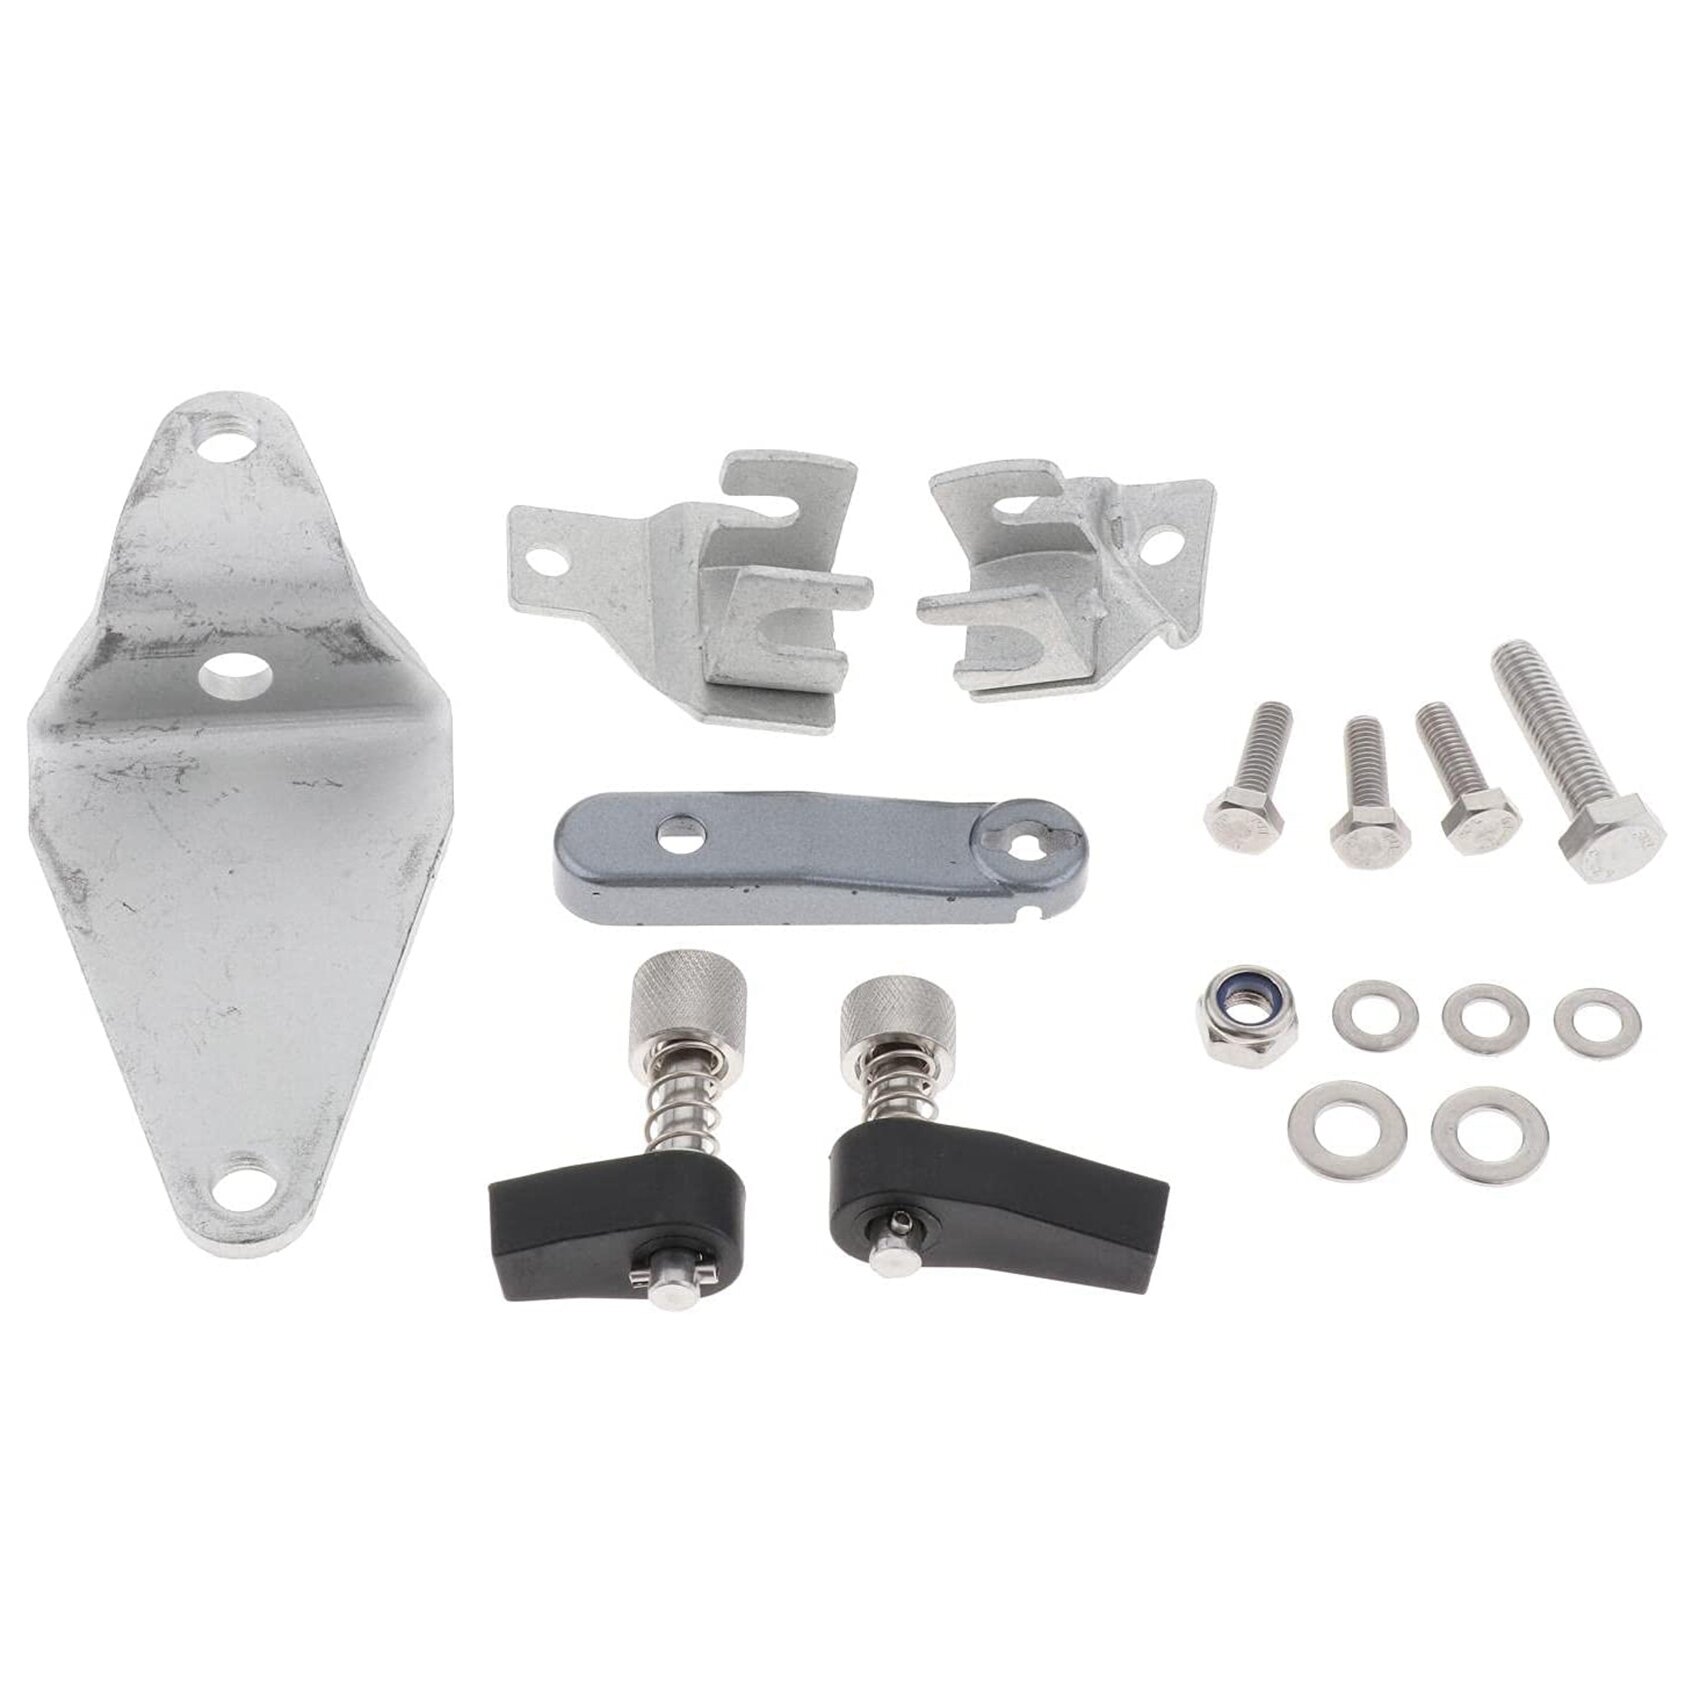 689-48501-21-4D Remote Control Attachment Kit for Yamaha Parsun 25HP 30HP 2 Stroke Outboard Motor